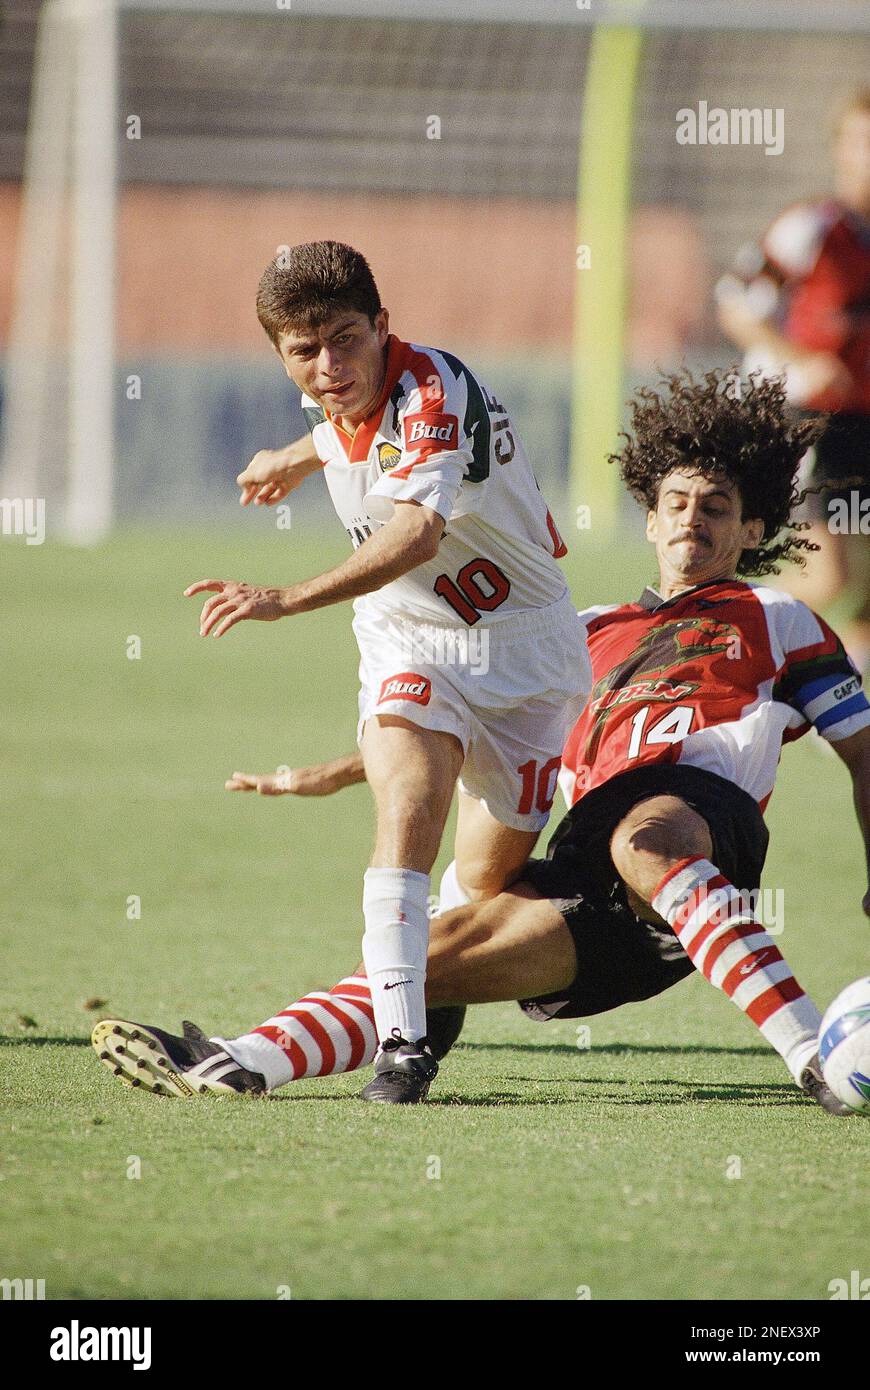 Mauricio Cienfuegos of the Los Angeles Galaxy, left, fights for the ball  with Leonel Alvarez of the Dallas Burn during the first half of their game,  Sunday, August 25, 1996 in Pasadena